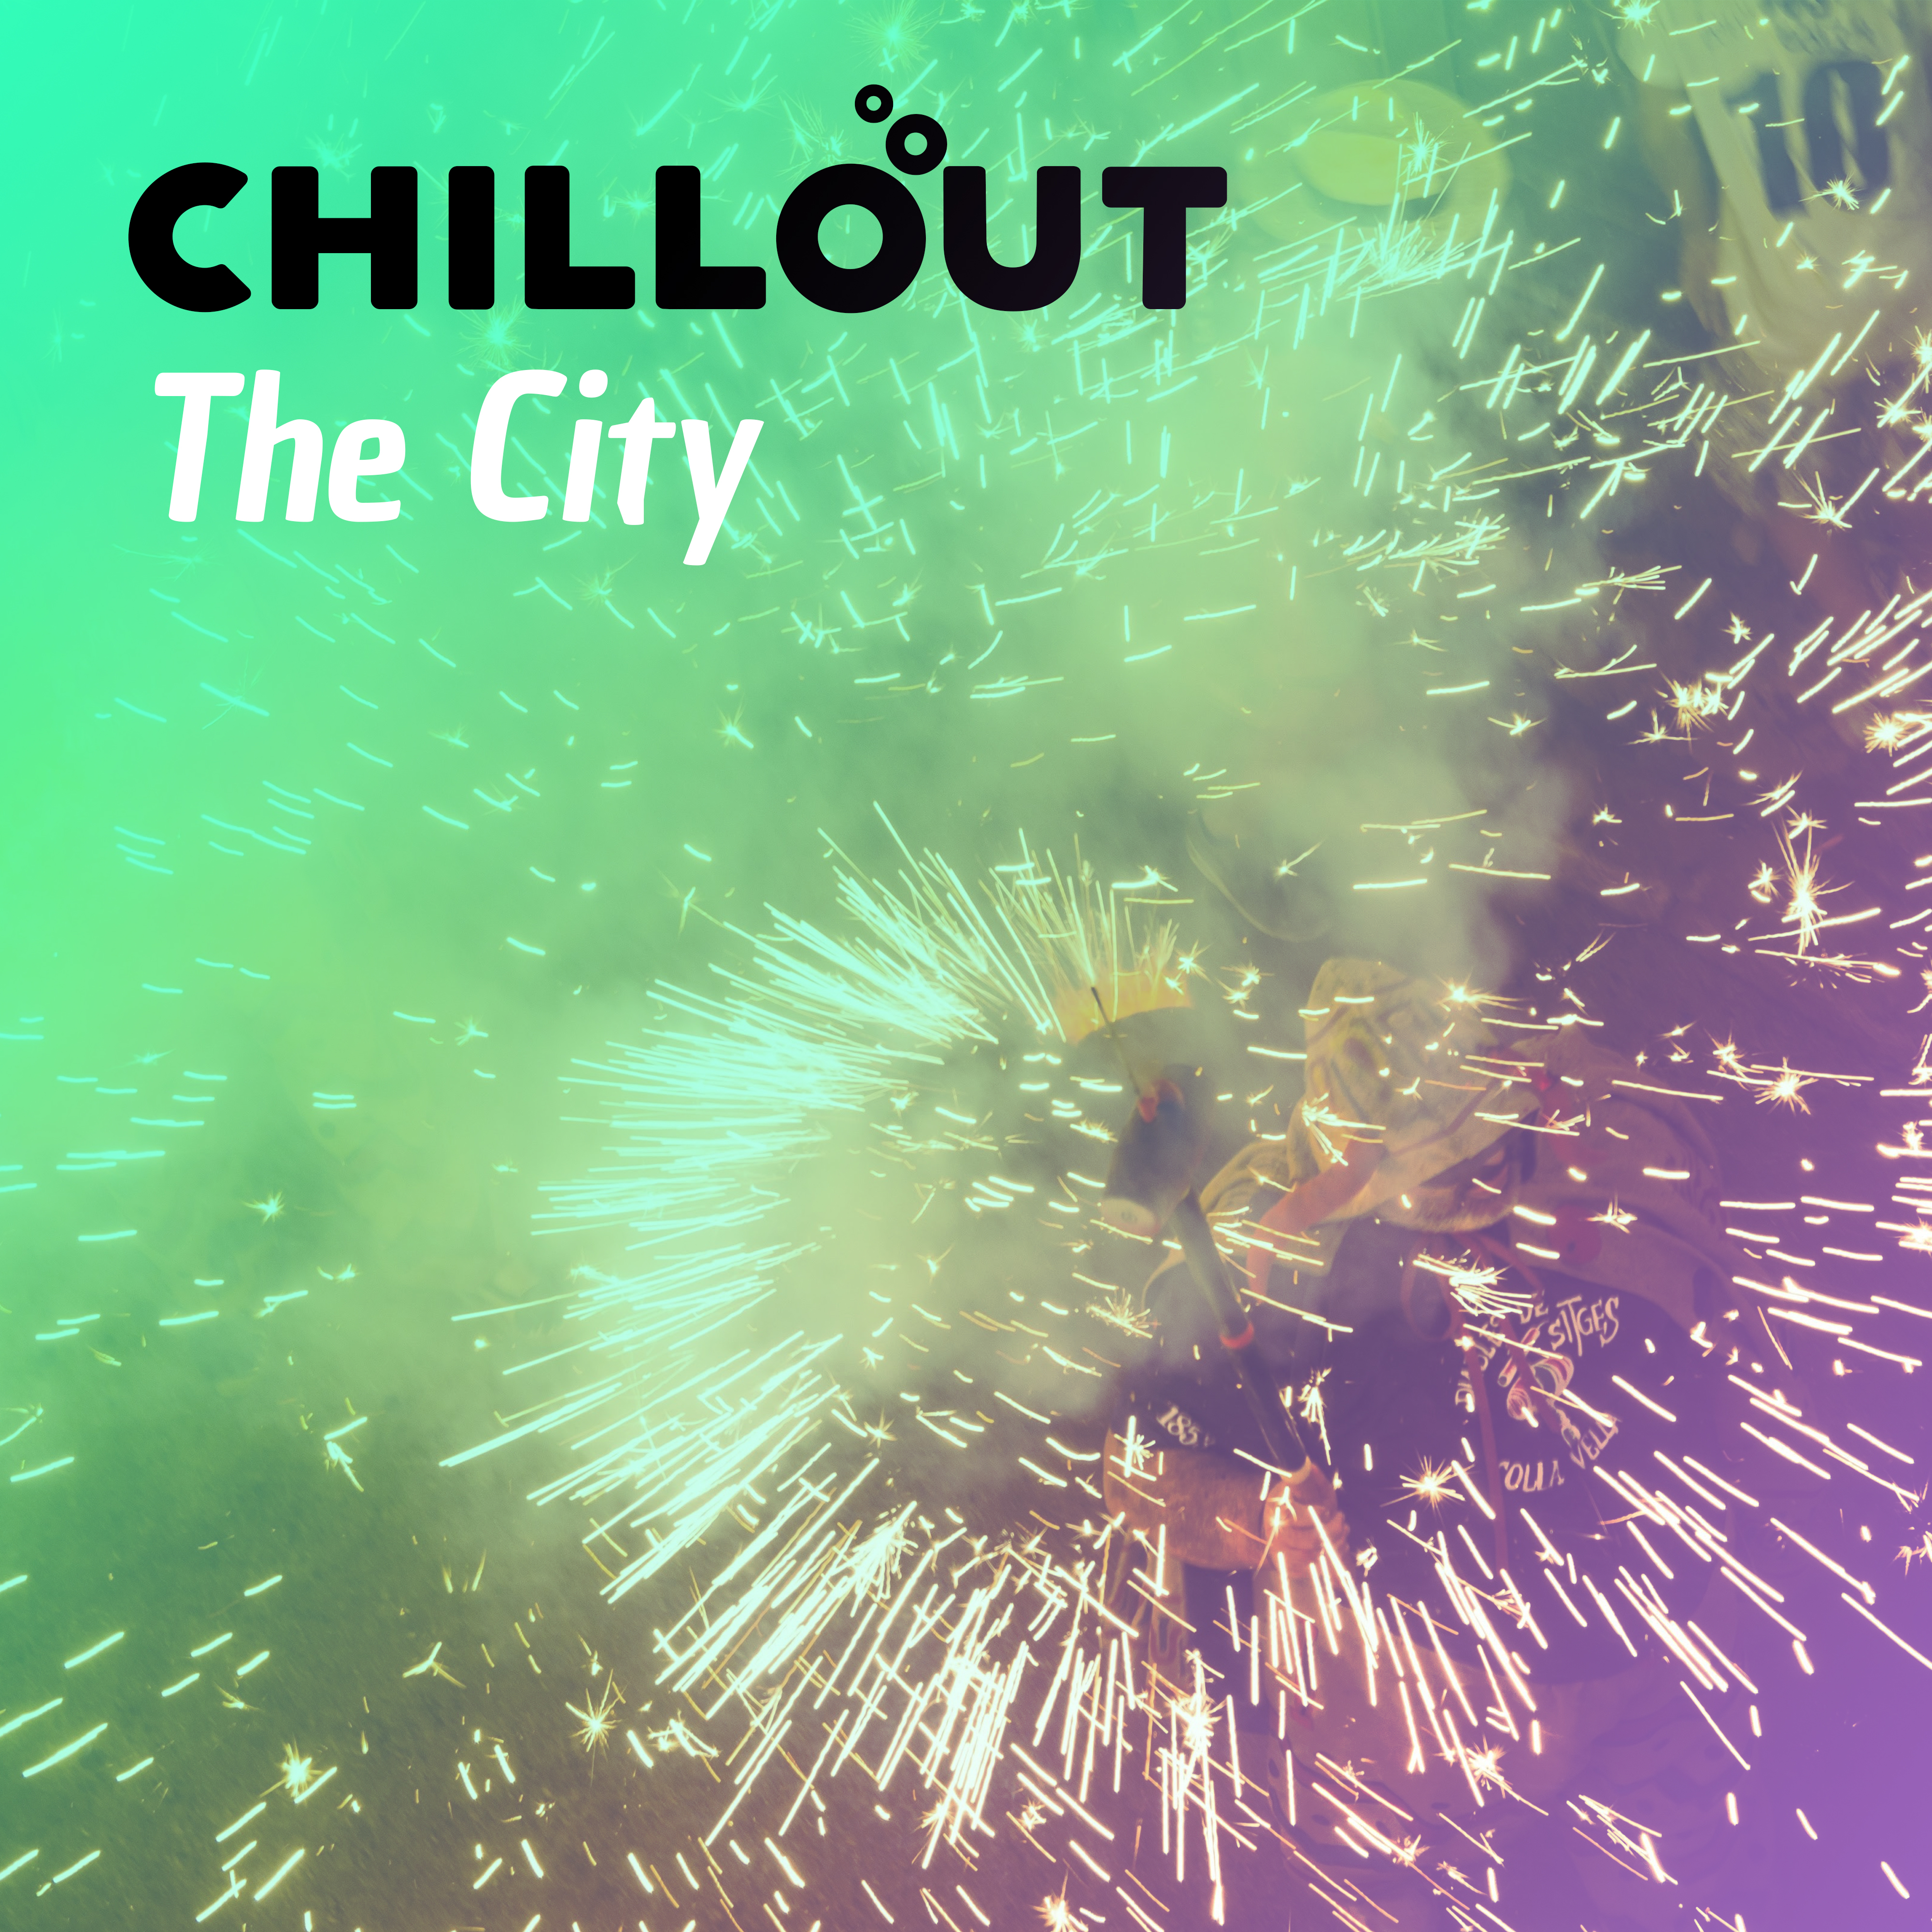 Chillout & The City – **** Vibes, Chill Out Music, Summer 2017, Party Hits, Relax